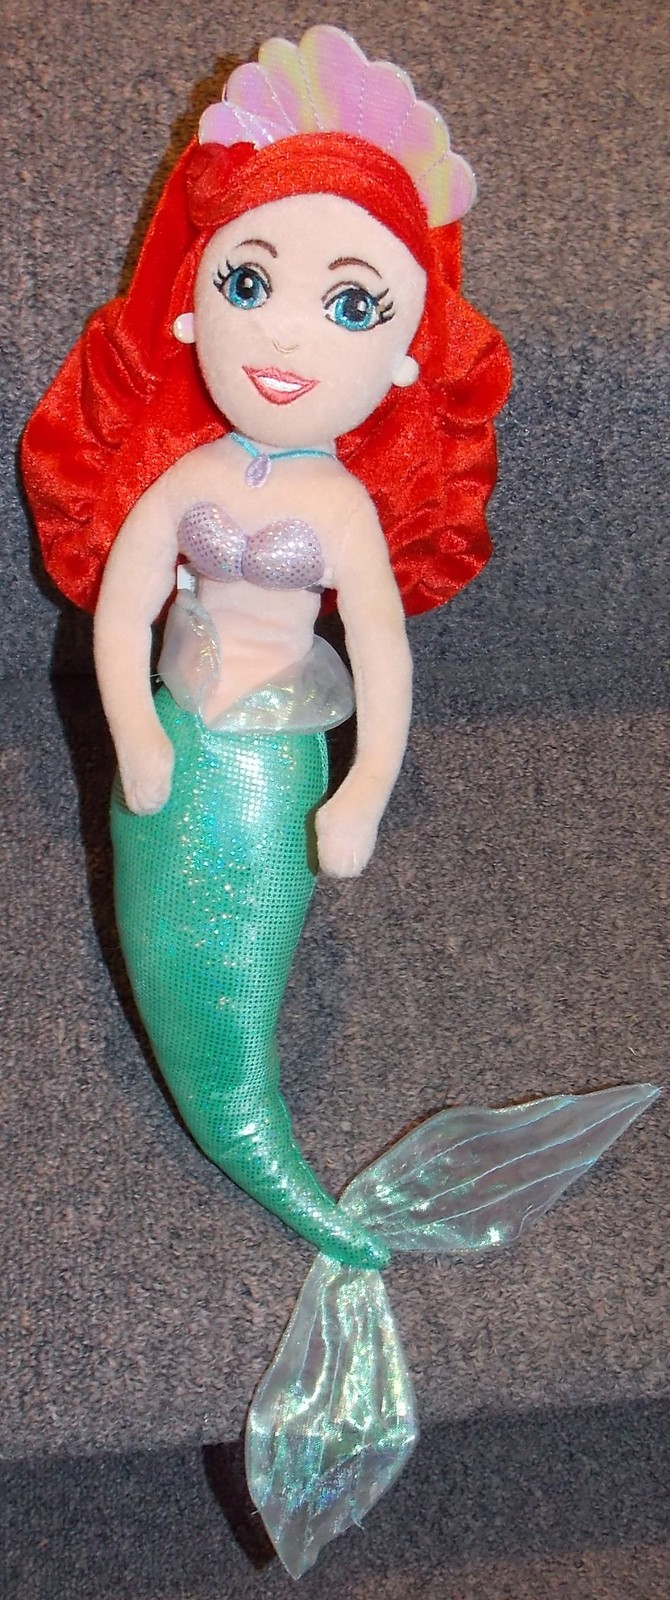 Primary image for Disney Little Mermaid Ariel 16 inch Stuffed Toy